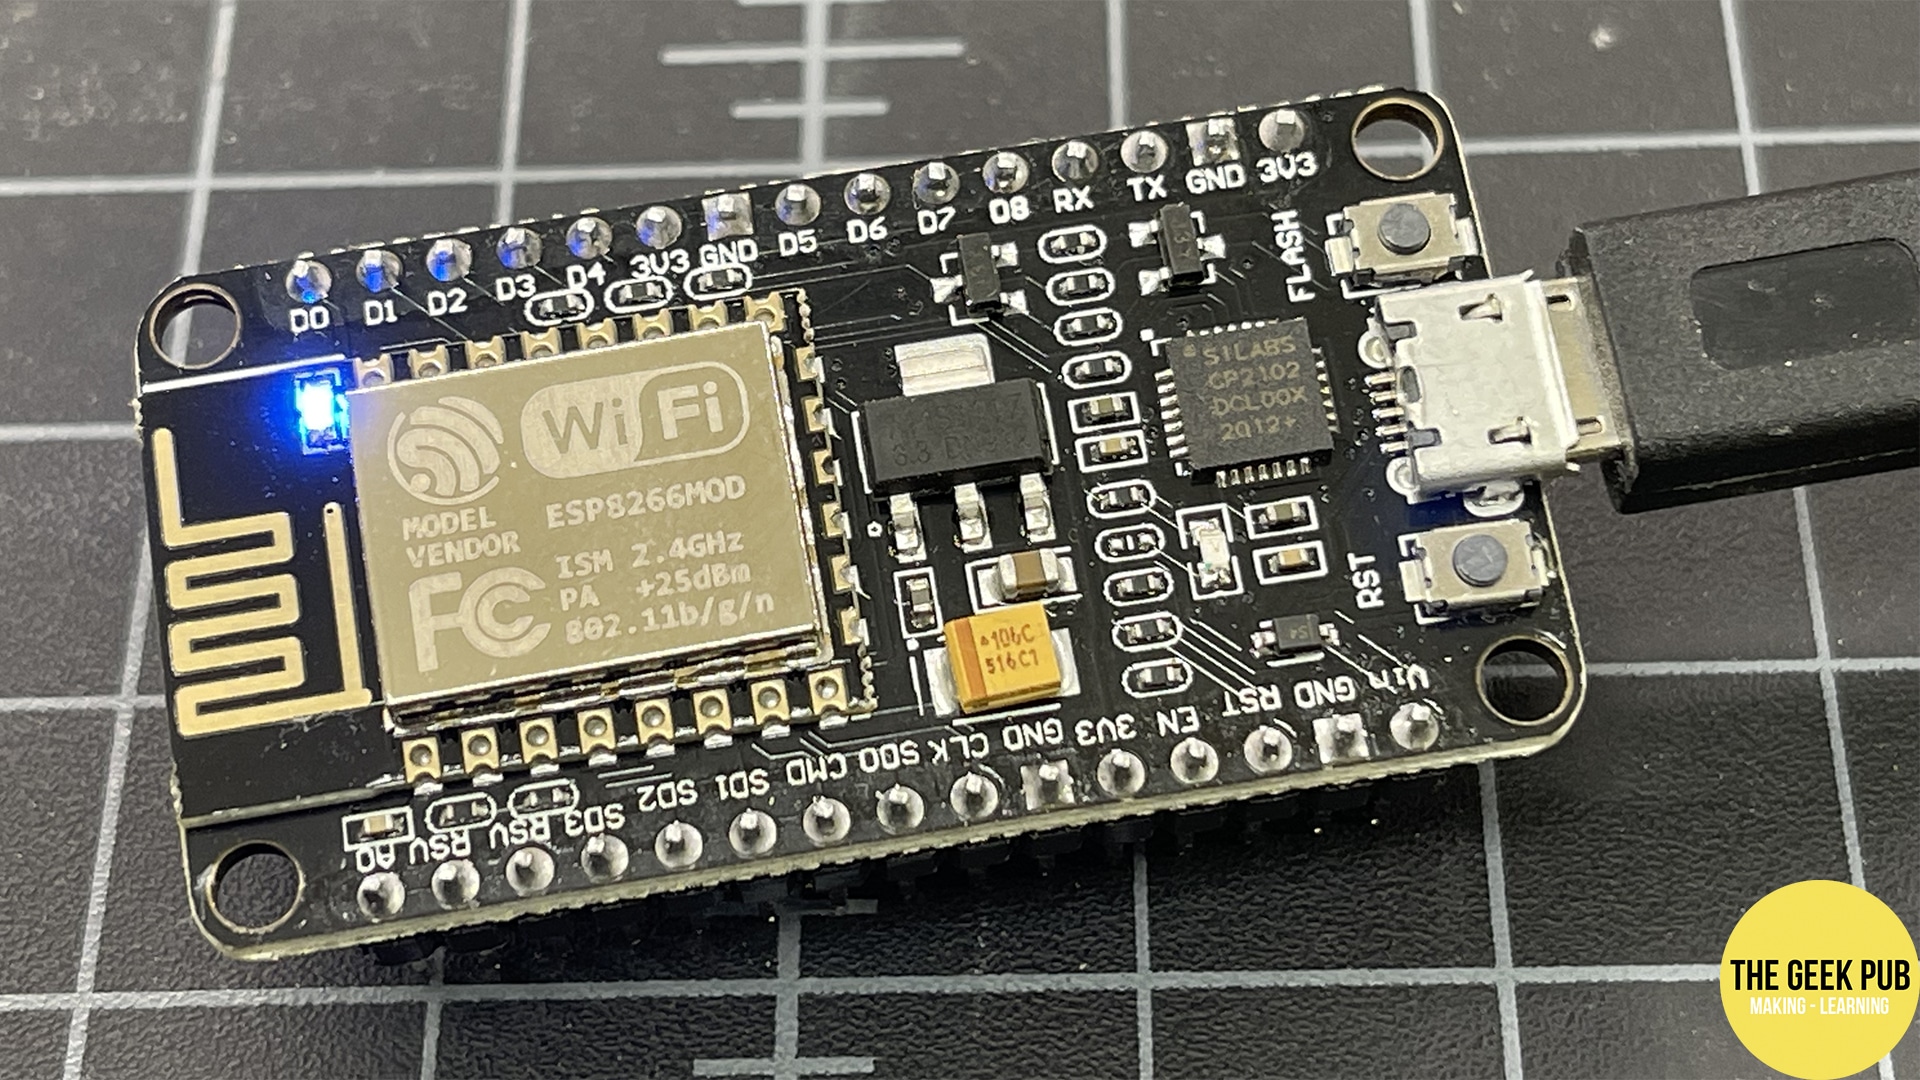 WLED connecting USB